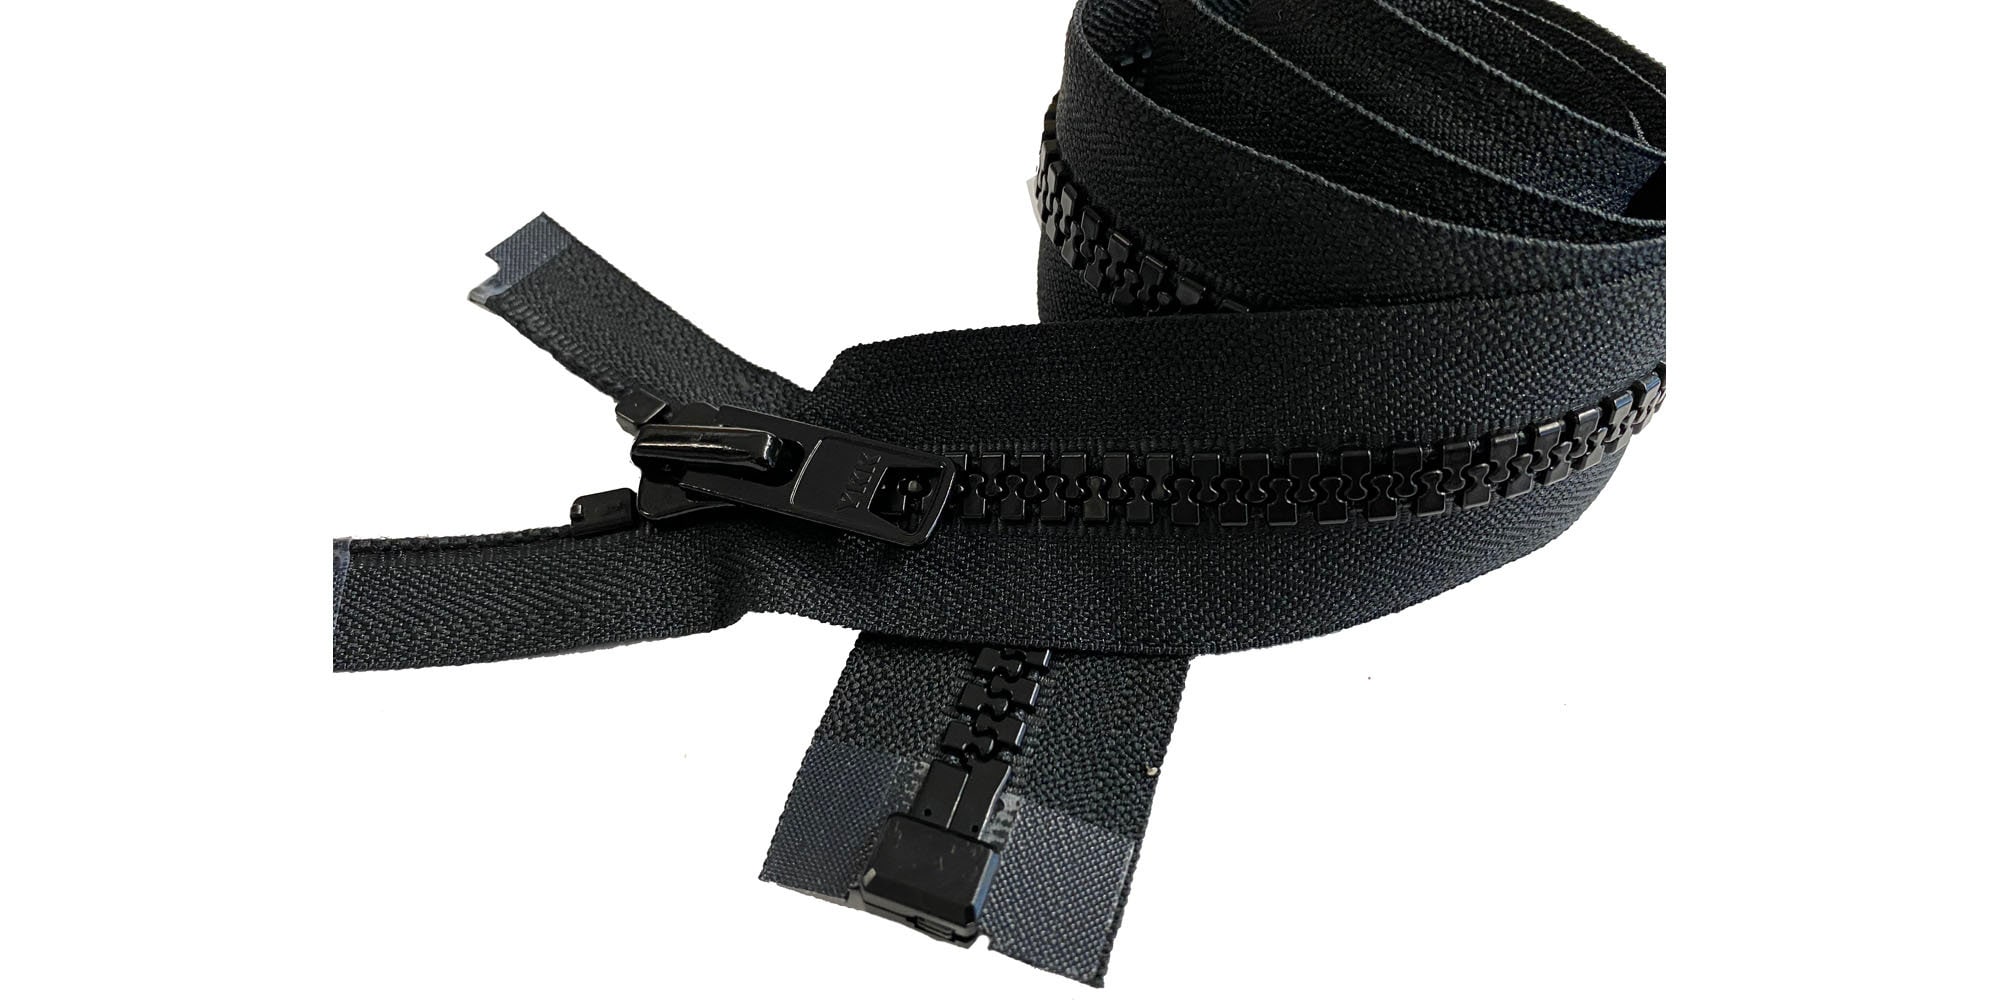 YKK #10 Heavy Duty Vislon Molded Zipper Chain - 5 Yards and 2#10 Vislon  Sliders with Top & Botom Stops Included. Color: Black. Made in The United